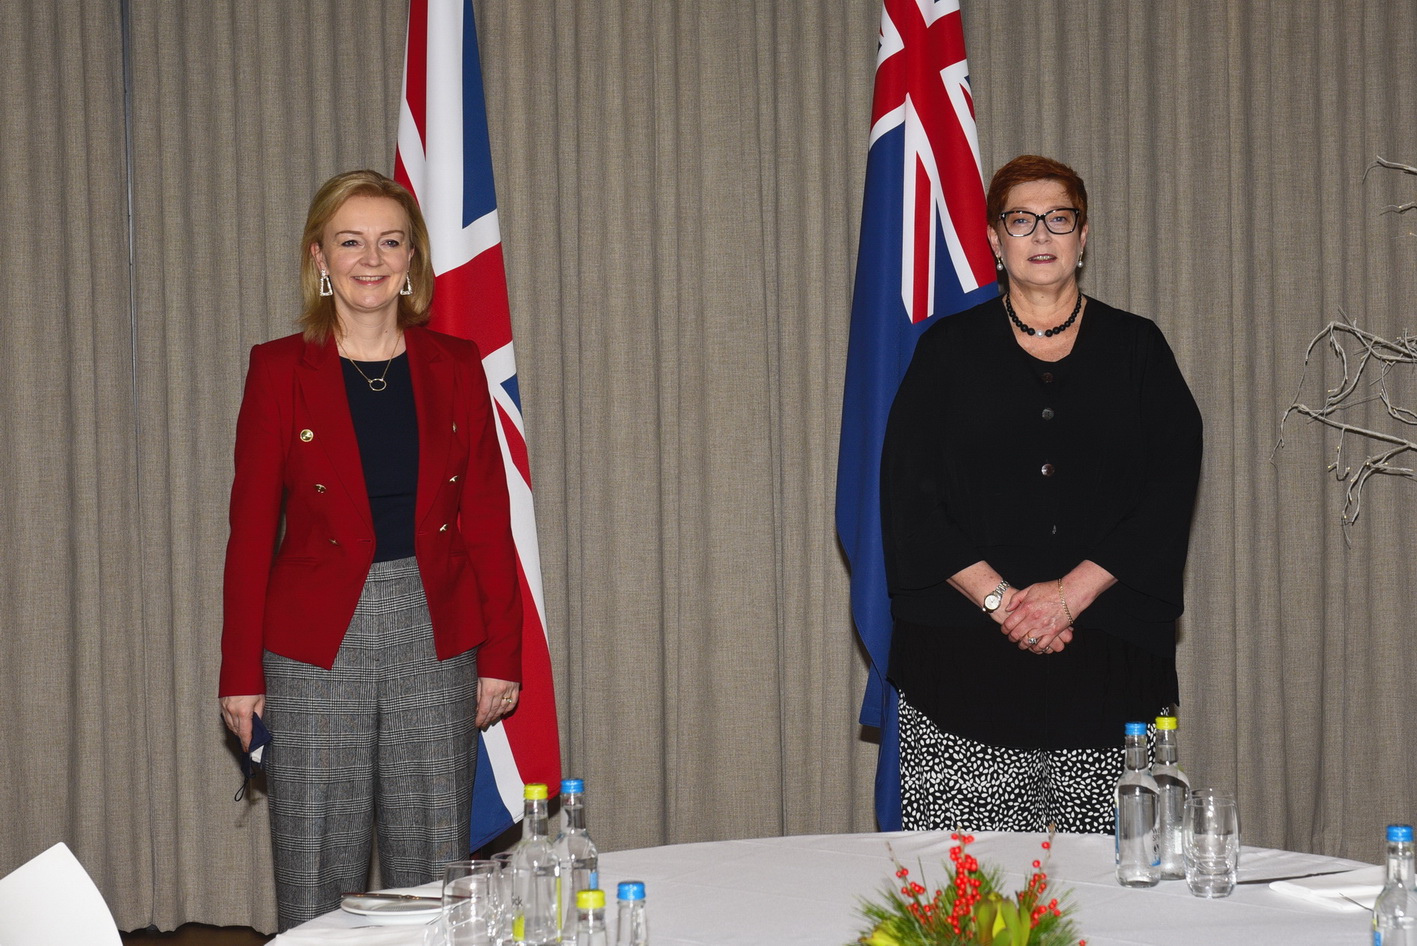 Liz Truss, UK Foreign Secretary and Marise Payne the Australian Minister for Foreign Affairs